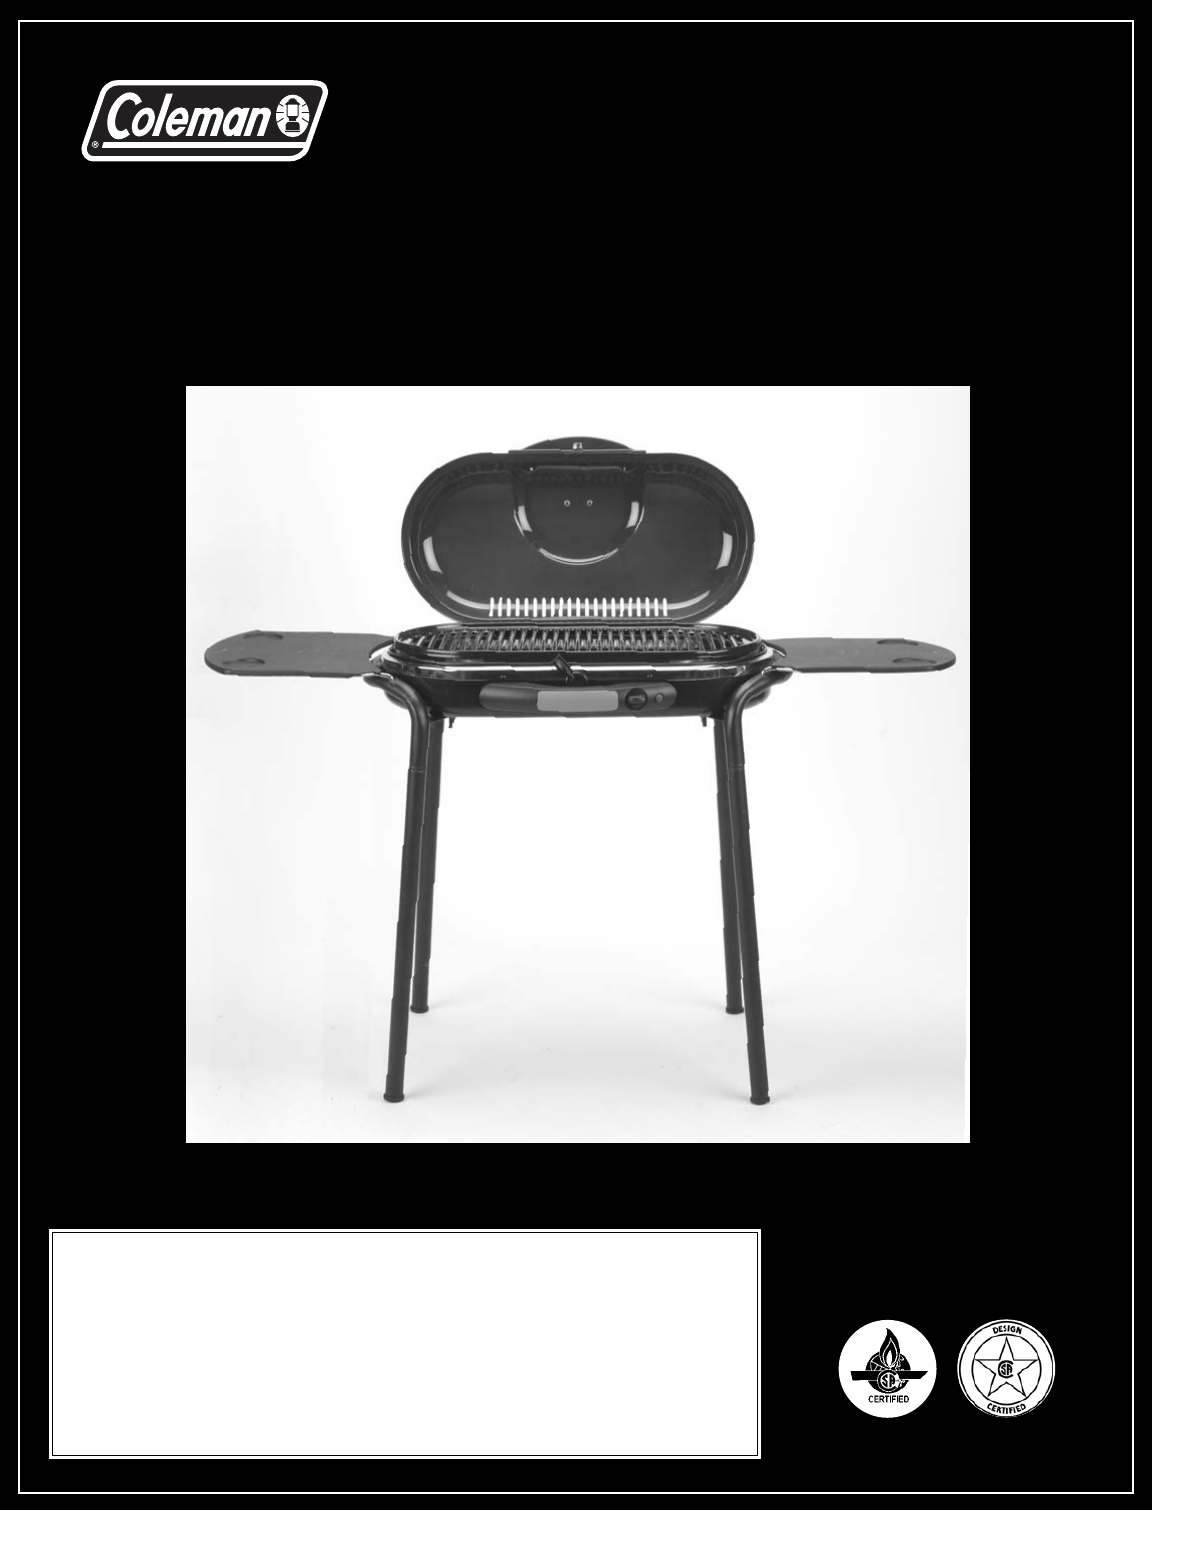 Coleman Gas Grill 9944 Series User Guide